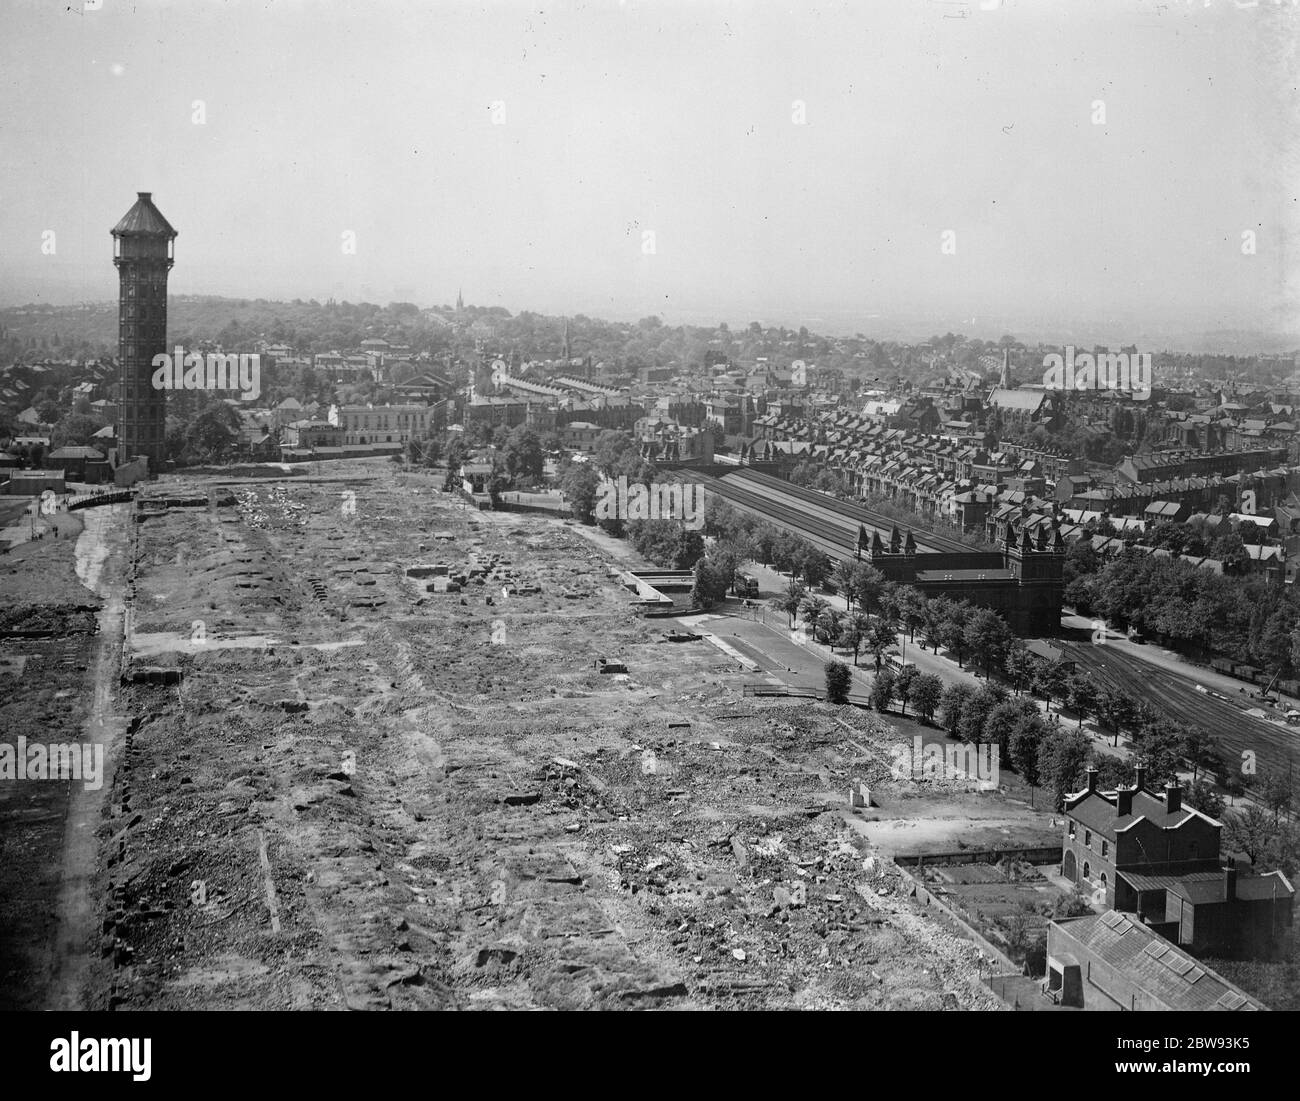 An general view of the site where The Crystal Palace building stood in Sydenham , London . The building burned down in 1936 . 1939 . Stock Photo